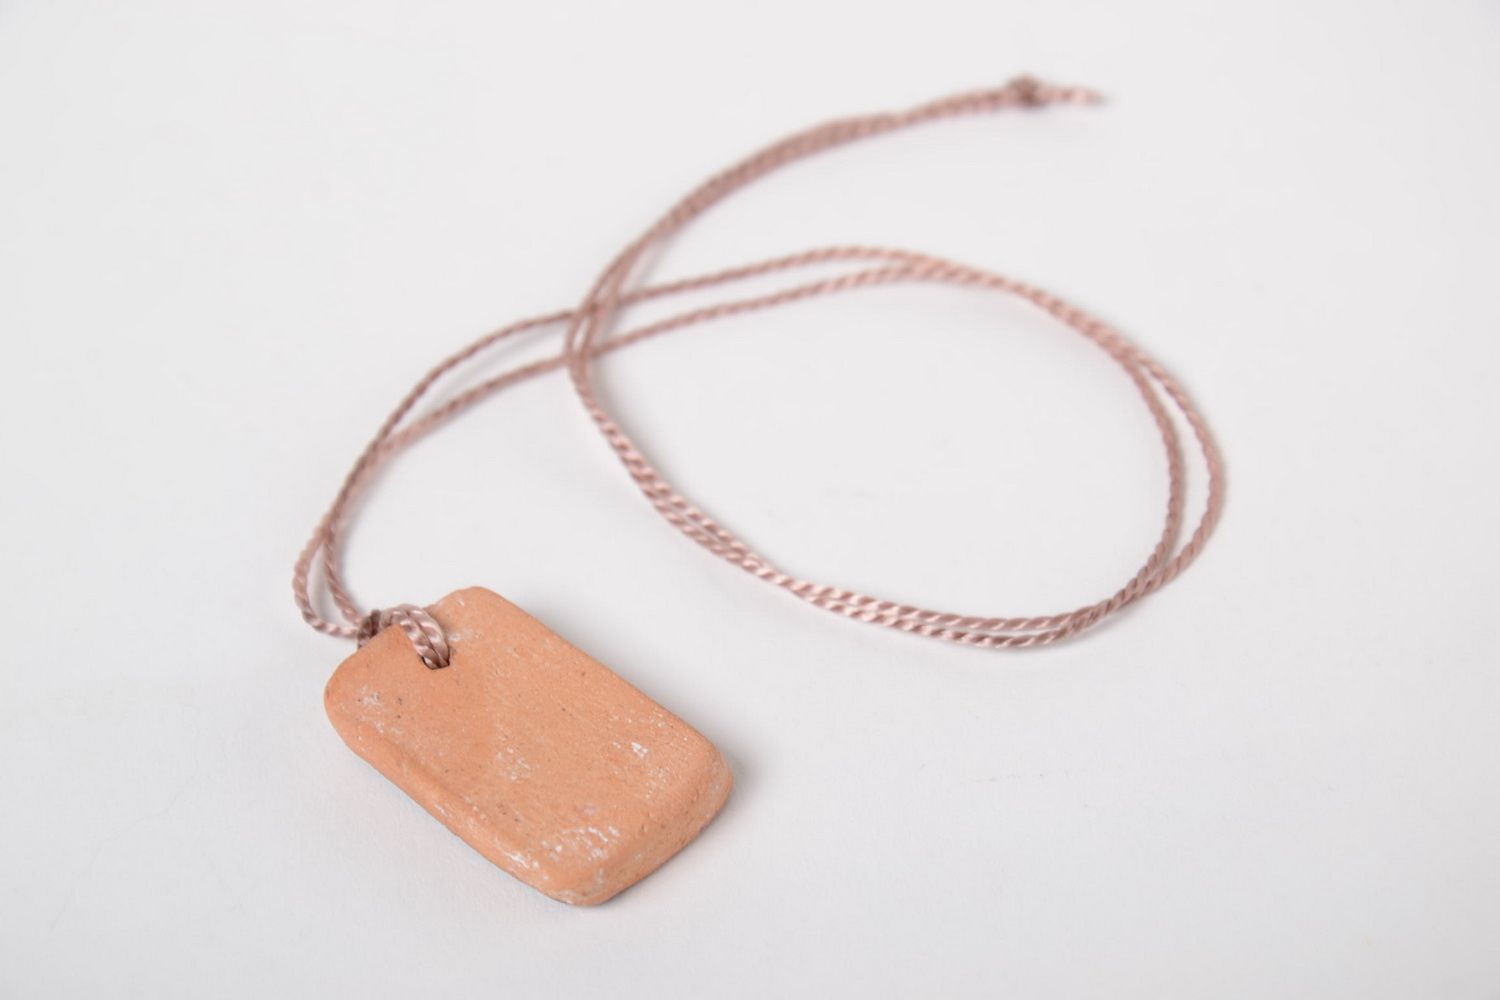 Handmade ceramic jewelry pendant necklace rune meaning necklace designs photo 4